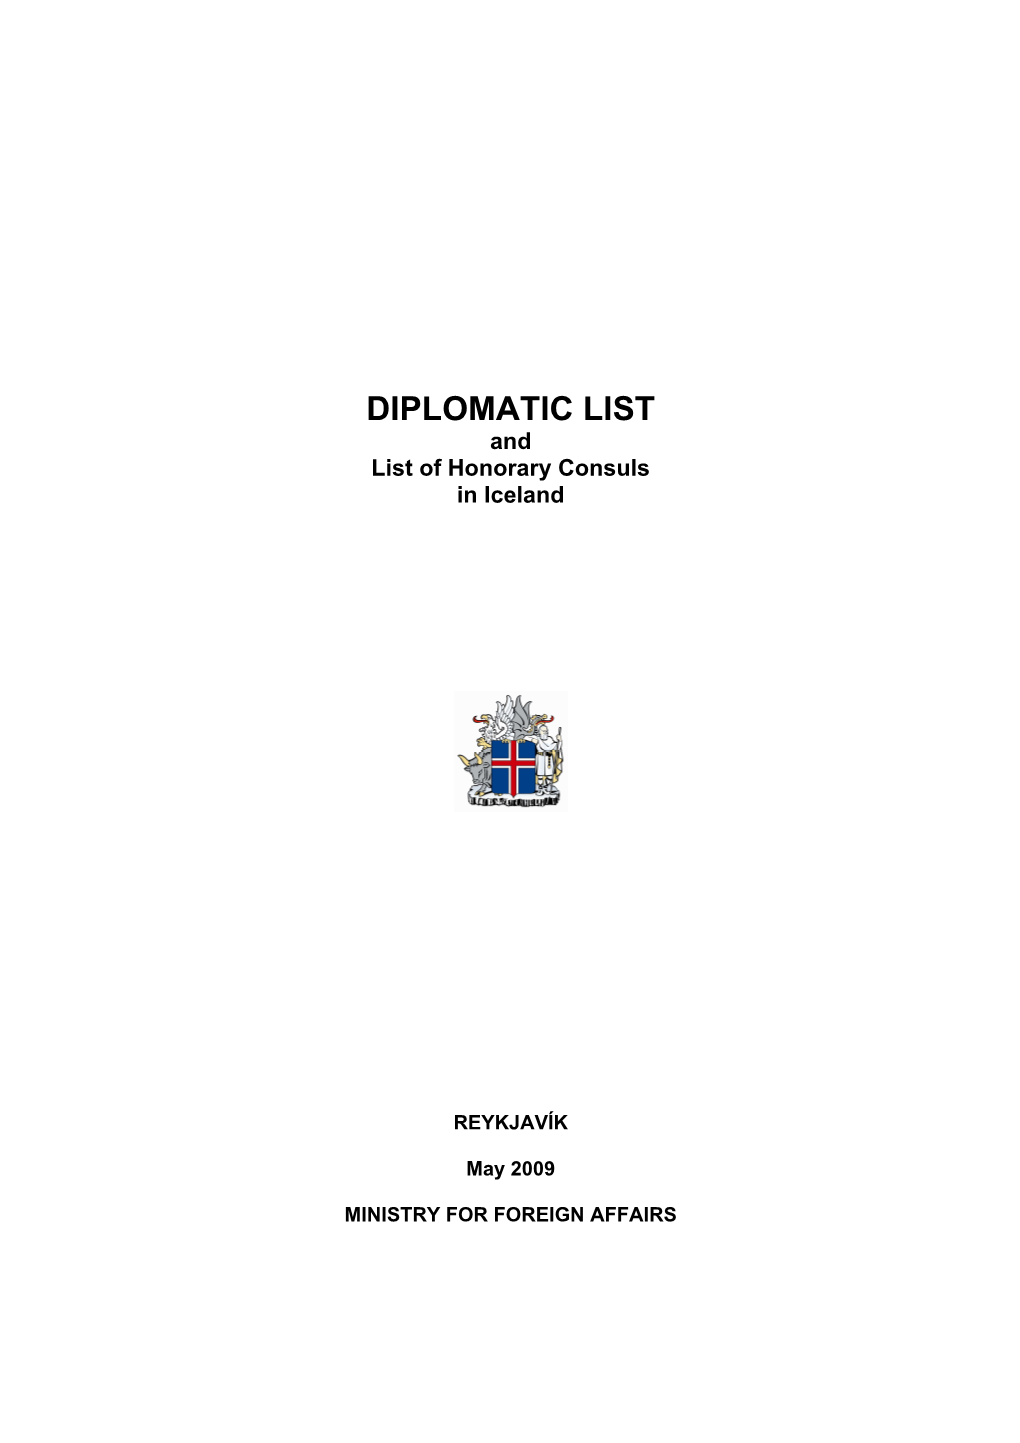 DIPLOMATIC LIST and List of Honorary Consuls in Iceland